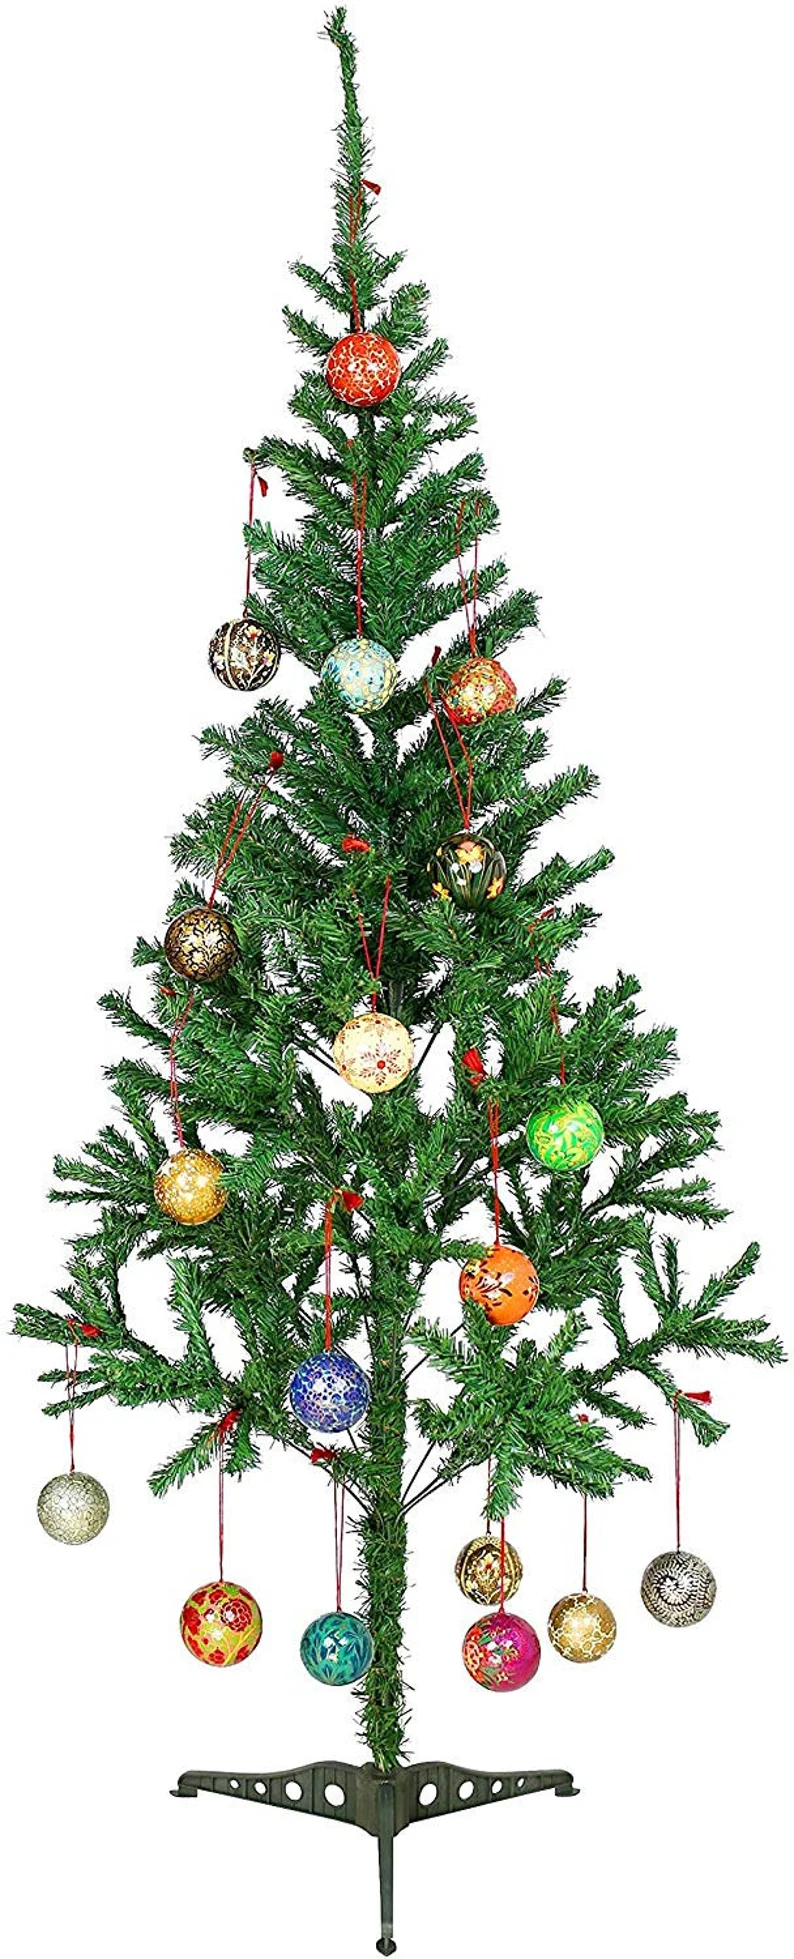 Hand painted christmas ornaments, Paper mache baubles, papier mache Christmas Ornaments, Hanging Christmas bauble, hanging Christmas bauble